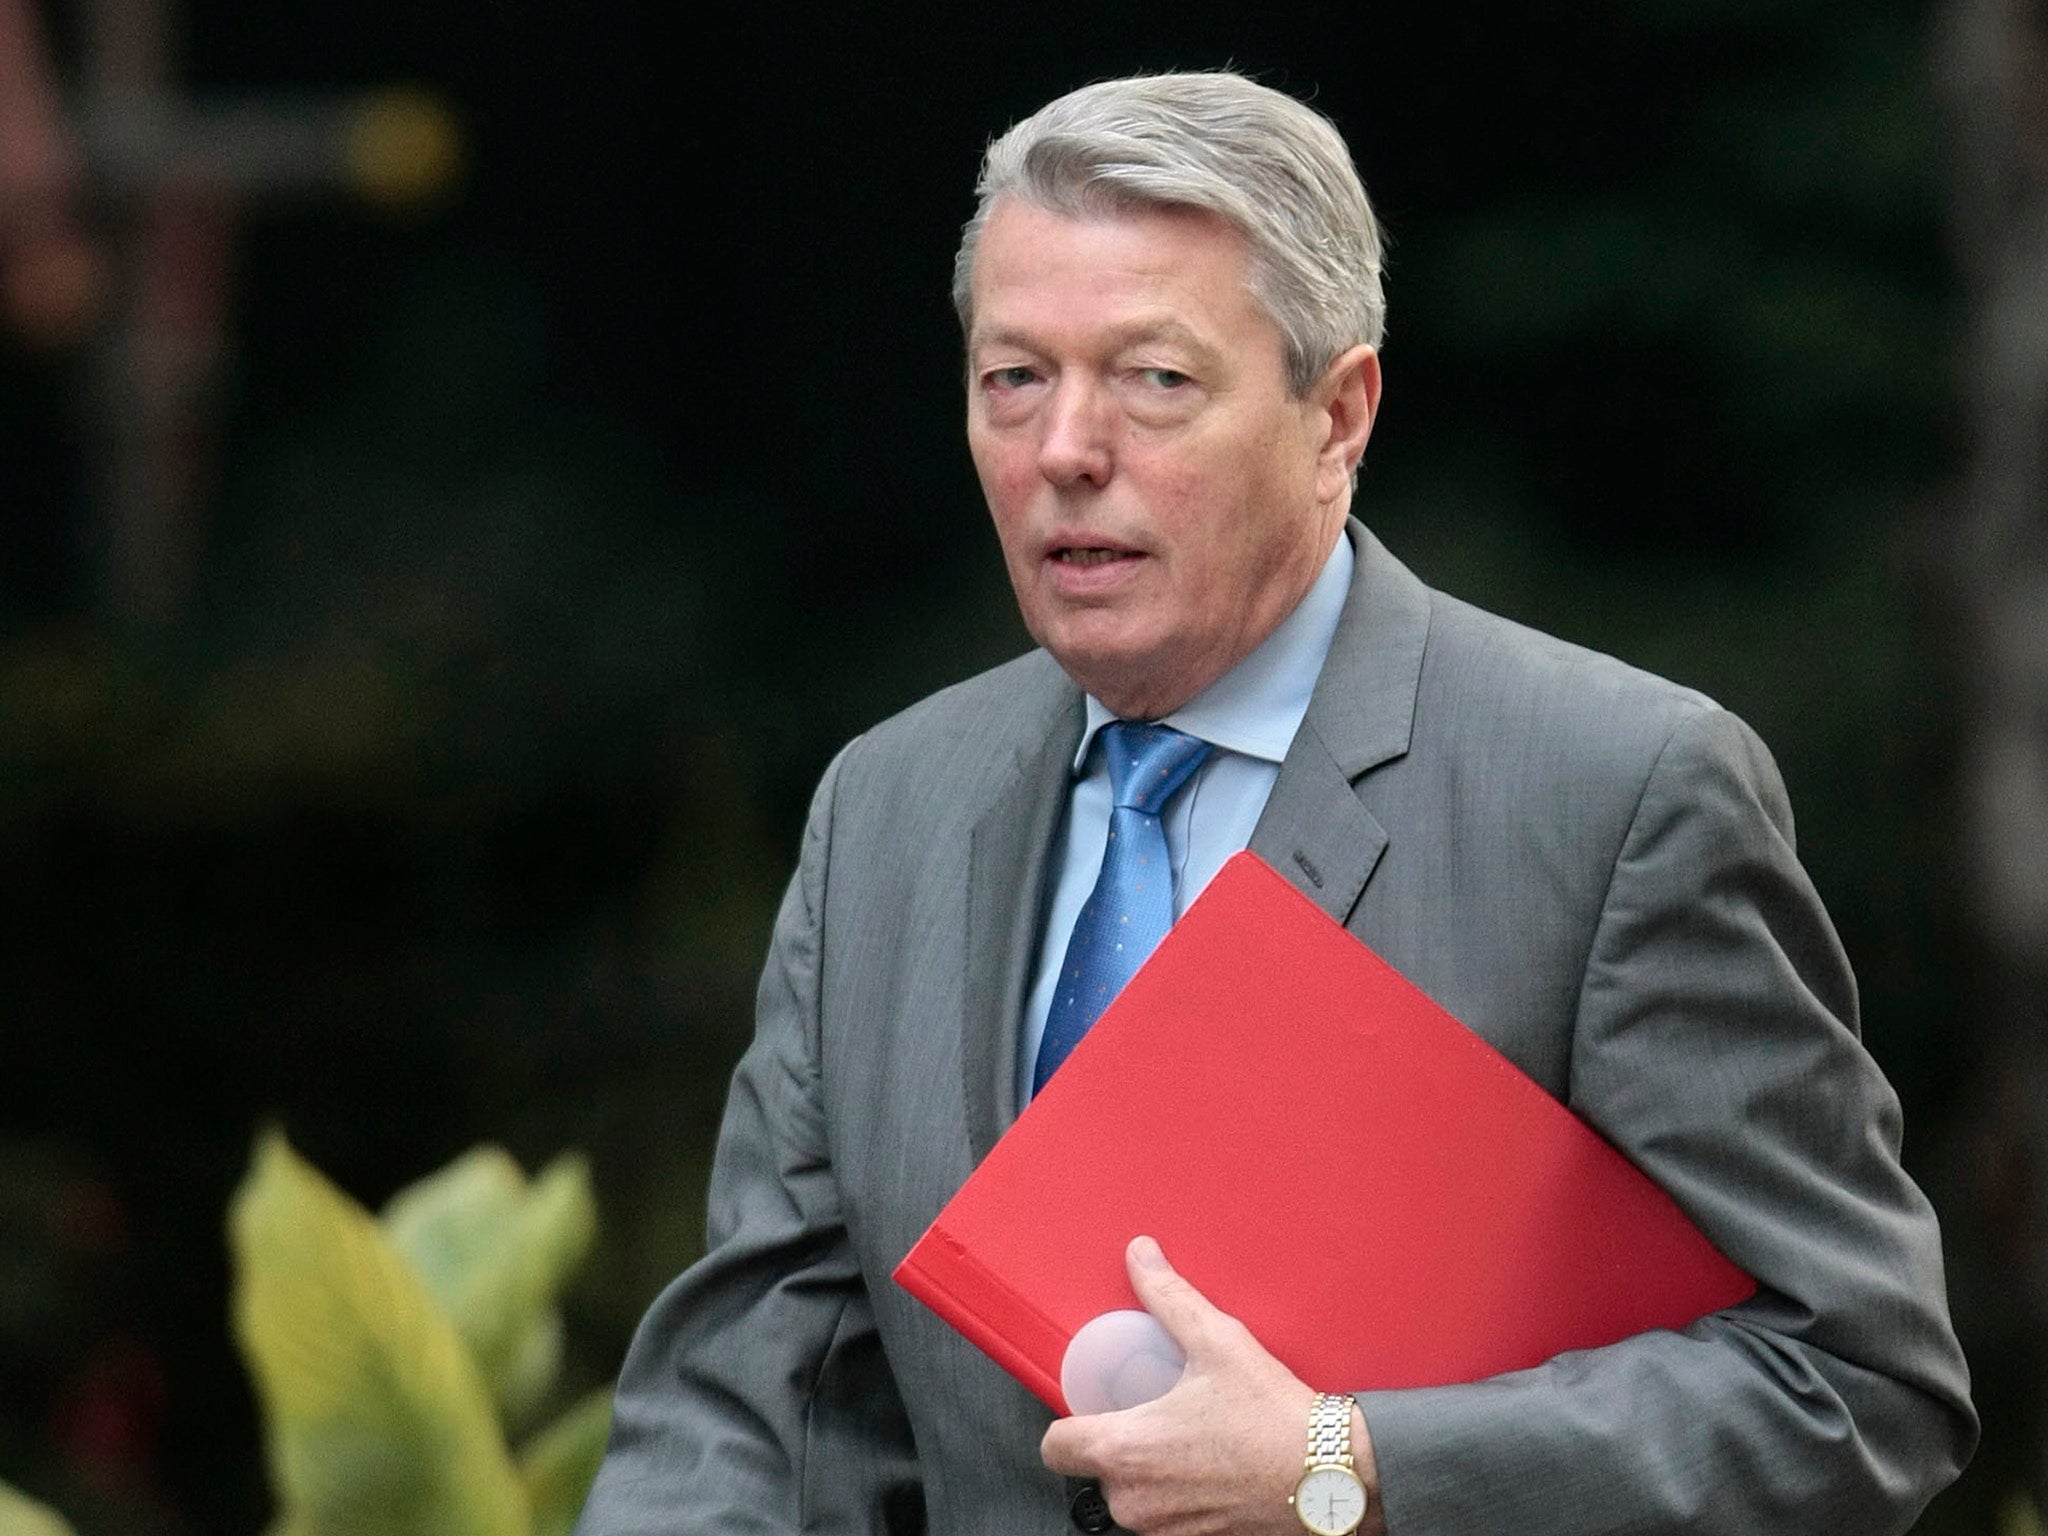 Alan Johnson, whose responsibilities included the Royal Mail, was at one time a postie